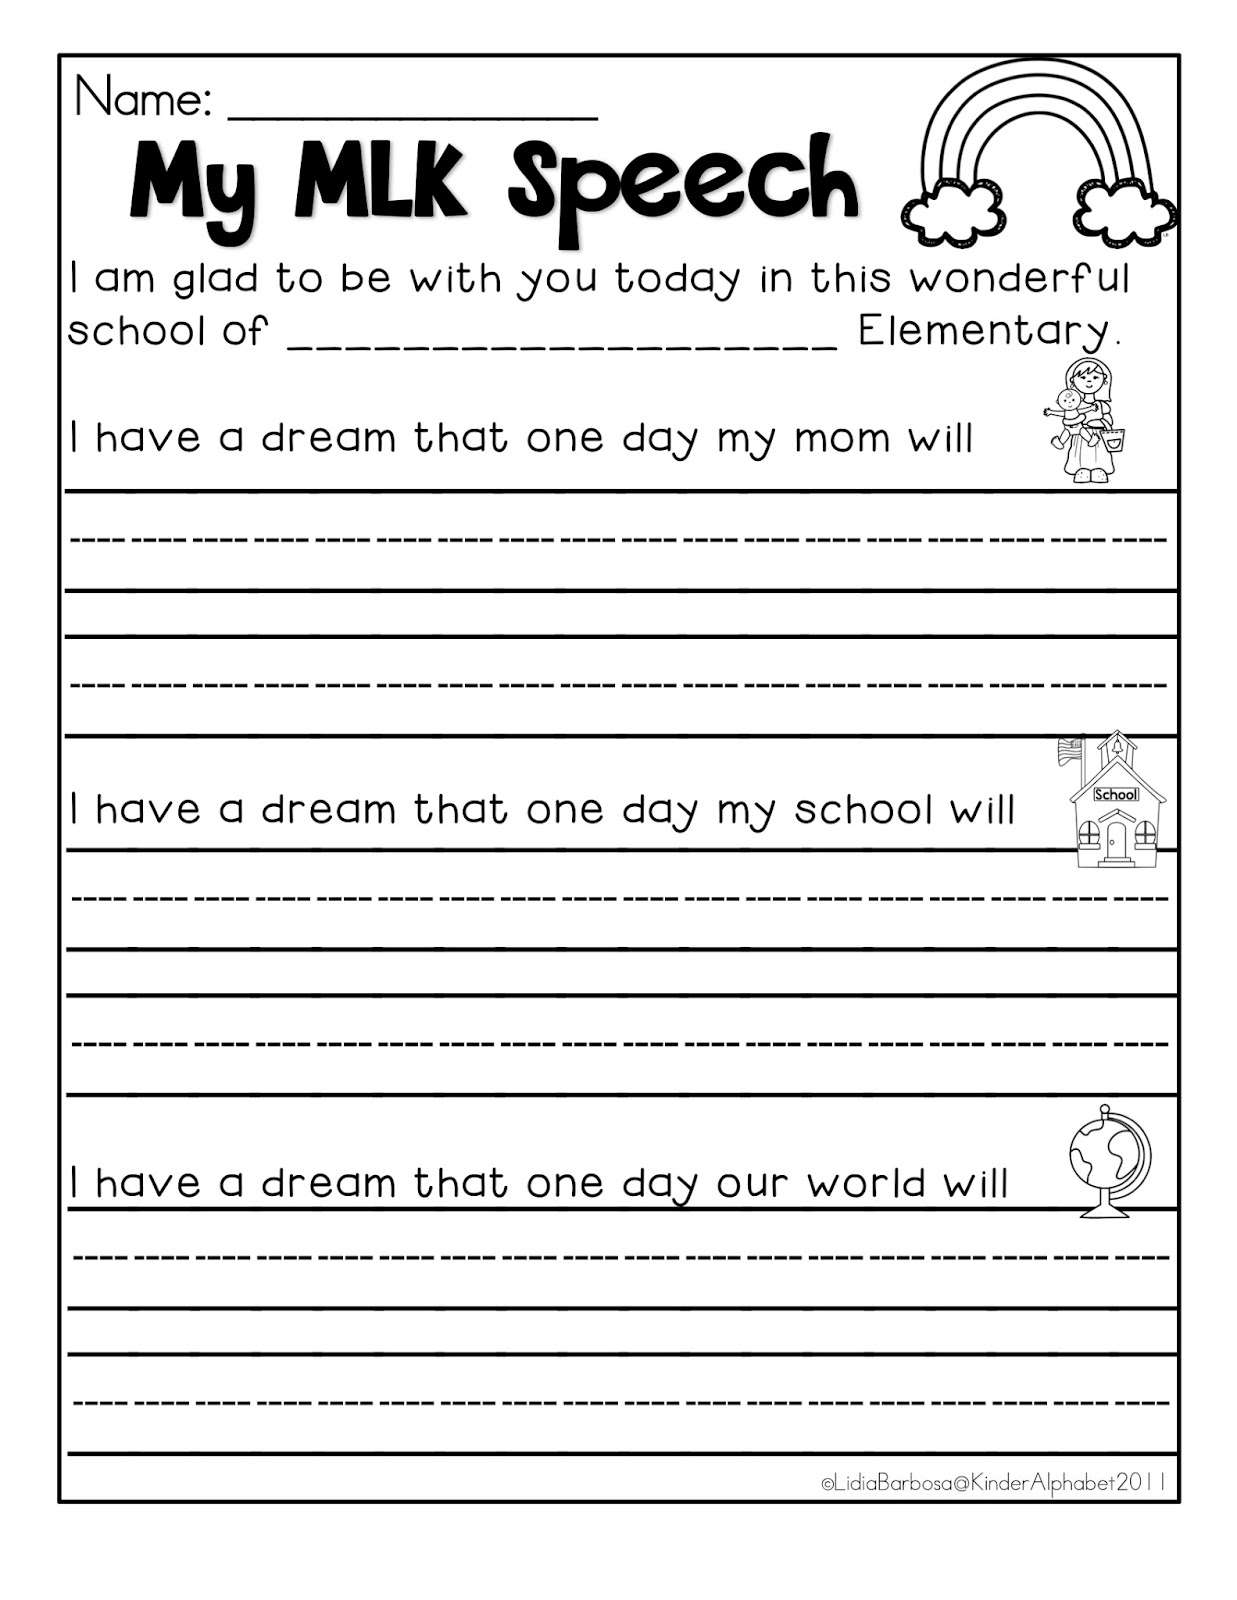 I have a dream speech essay introduction